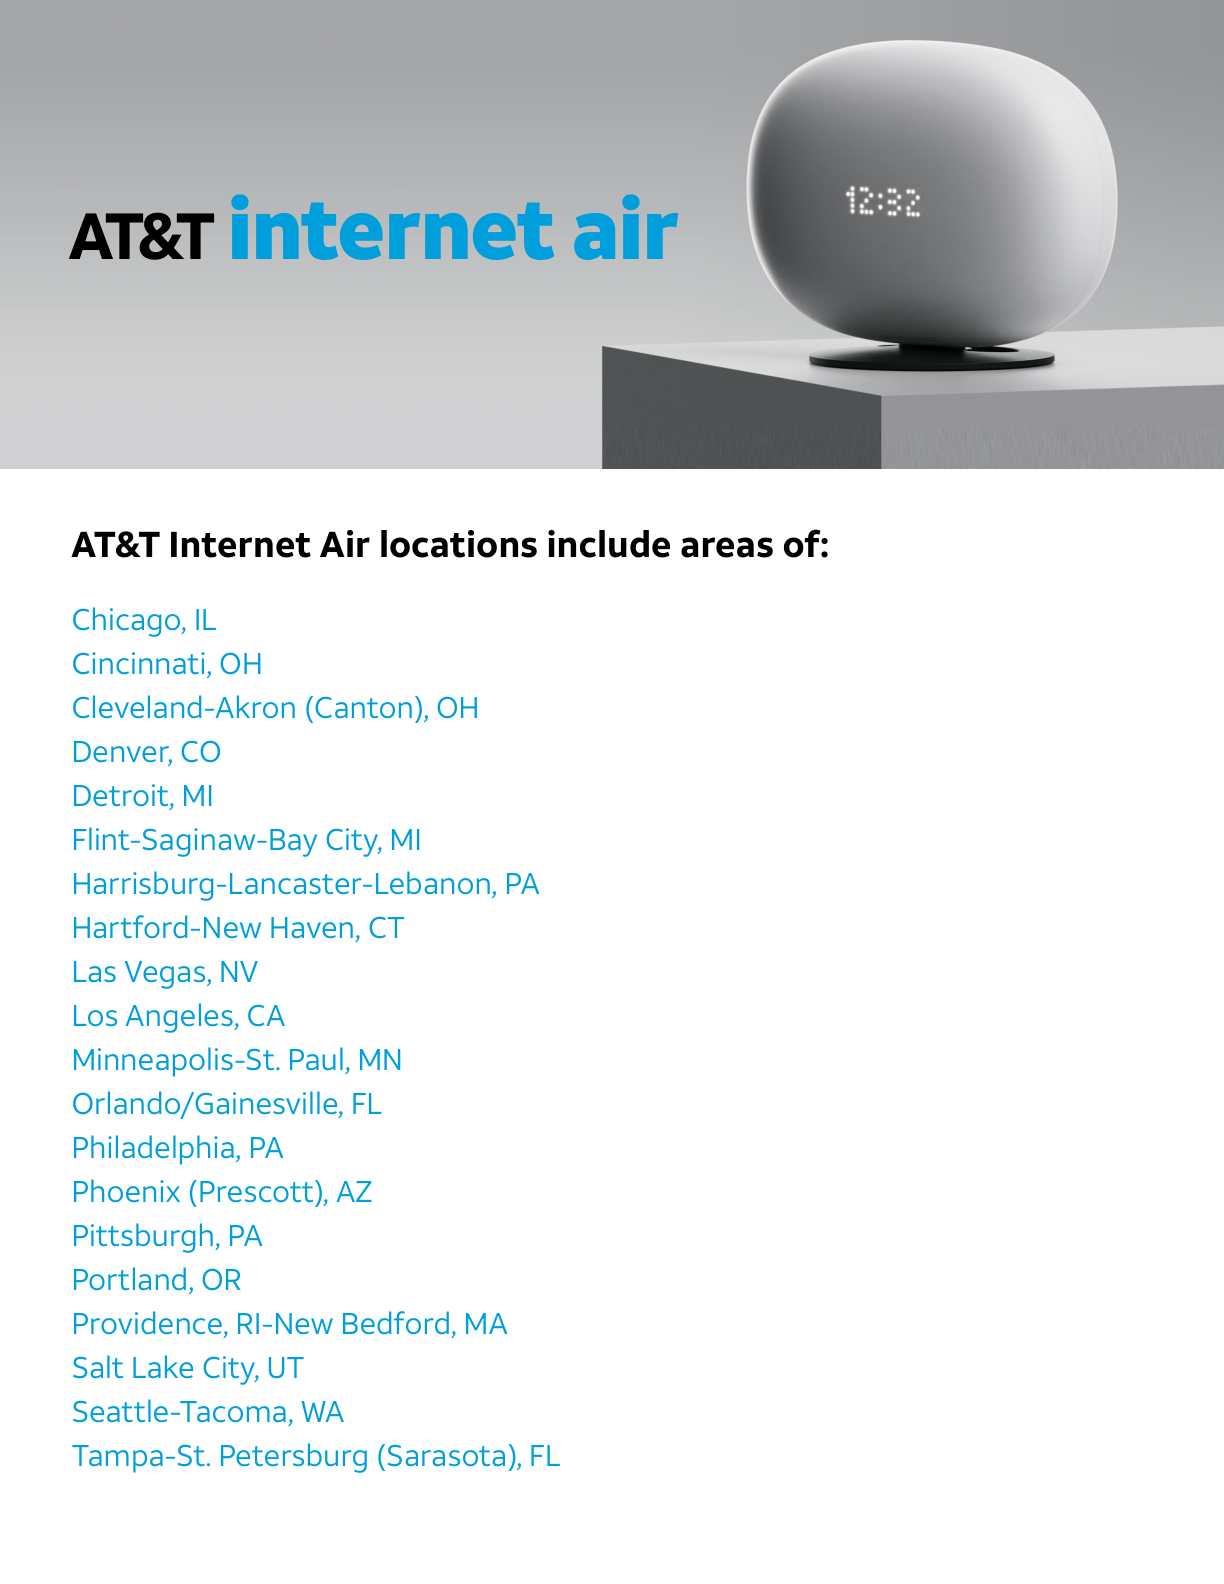 AT&T Internet Air locations